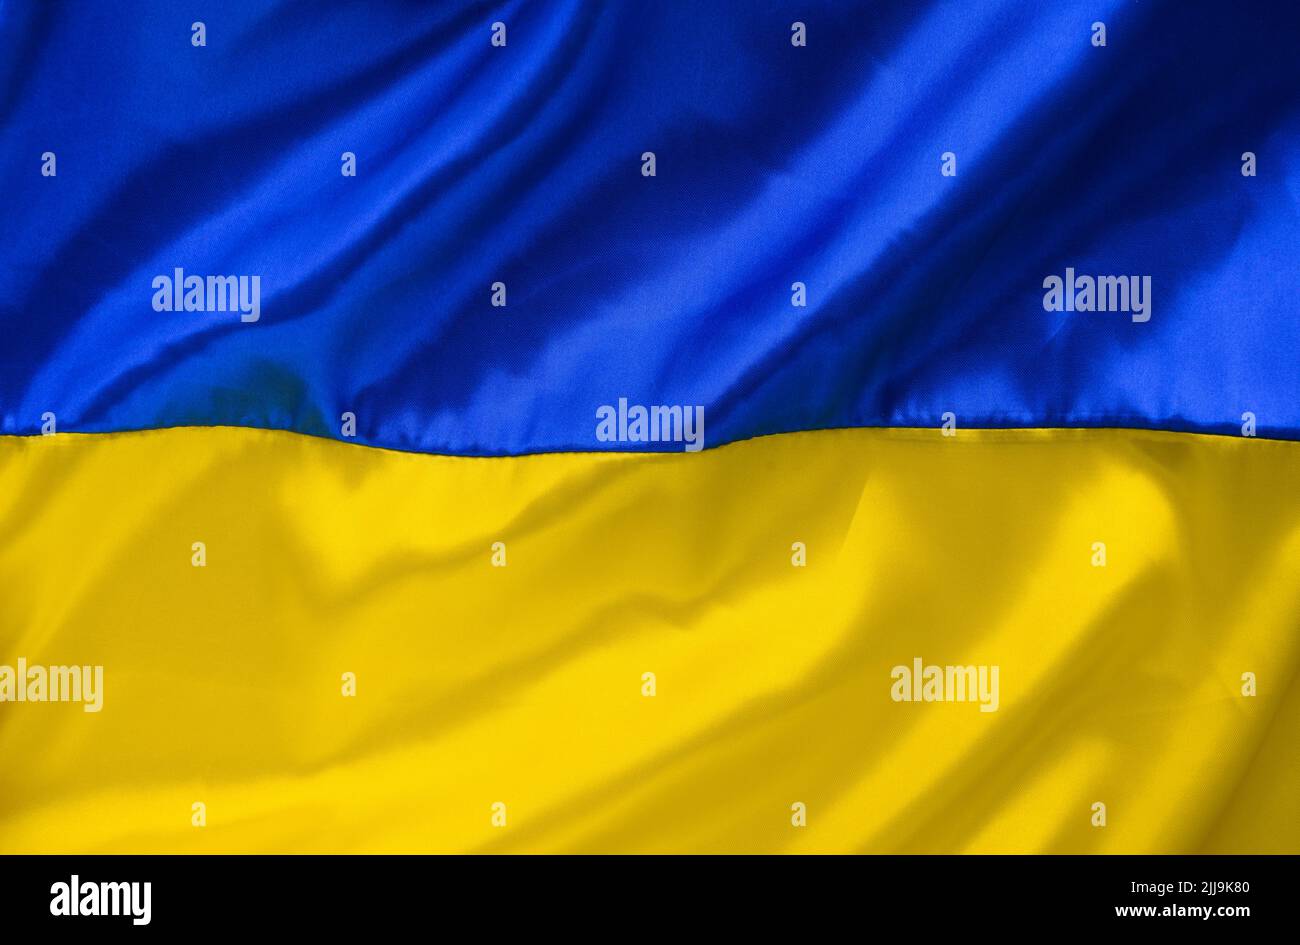 Fabric wave flag of Ukraine, UA. Blue and yellow bright colors. Close up curved texture background Stock Photo